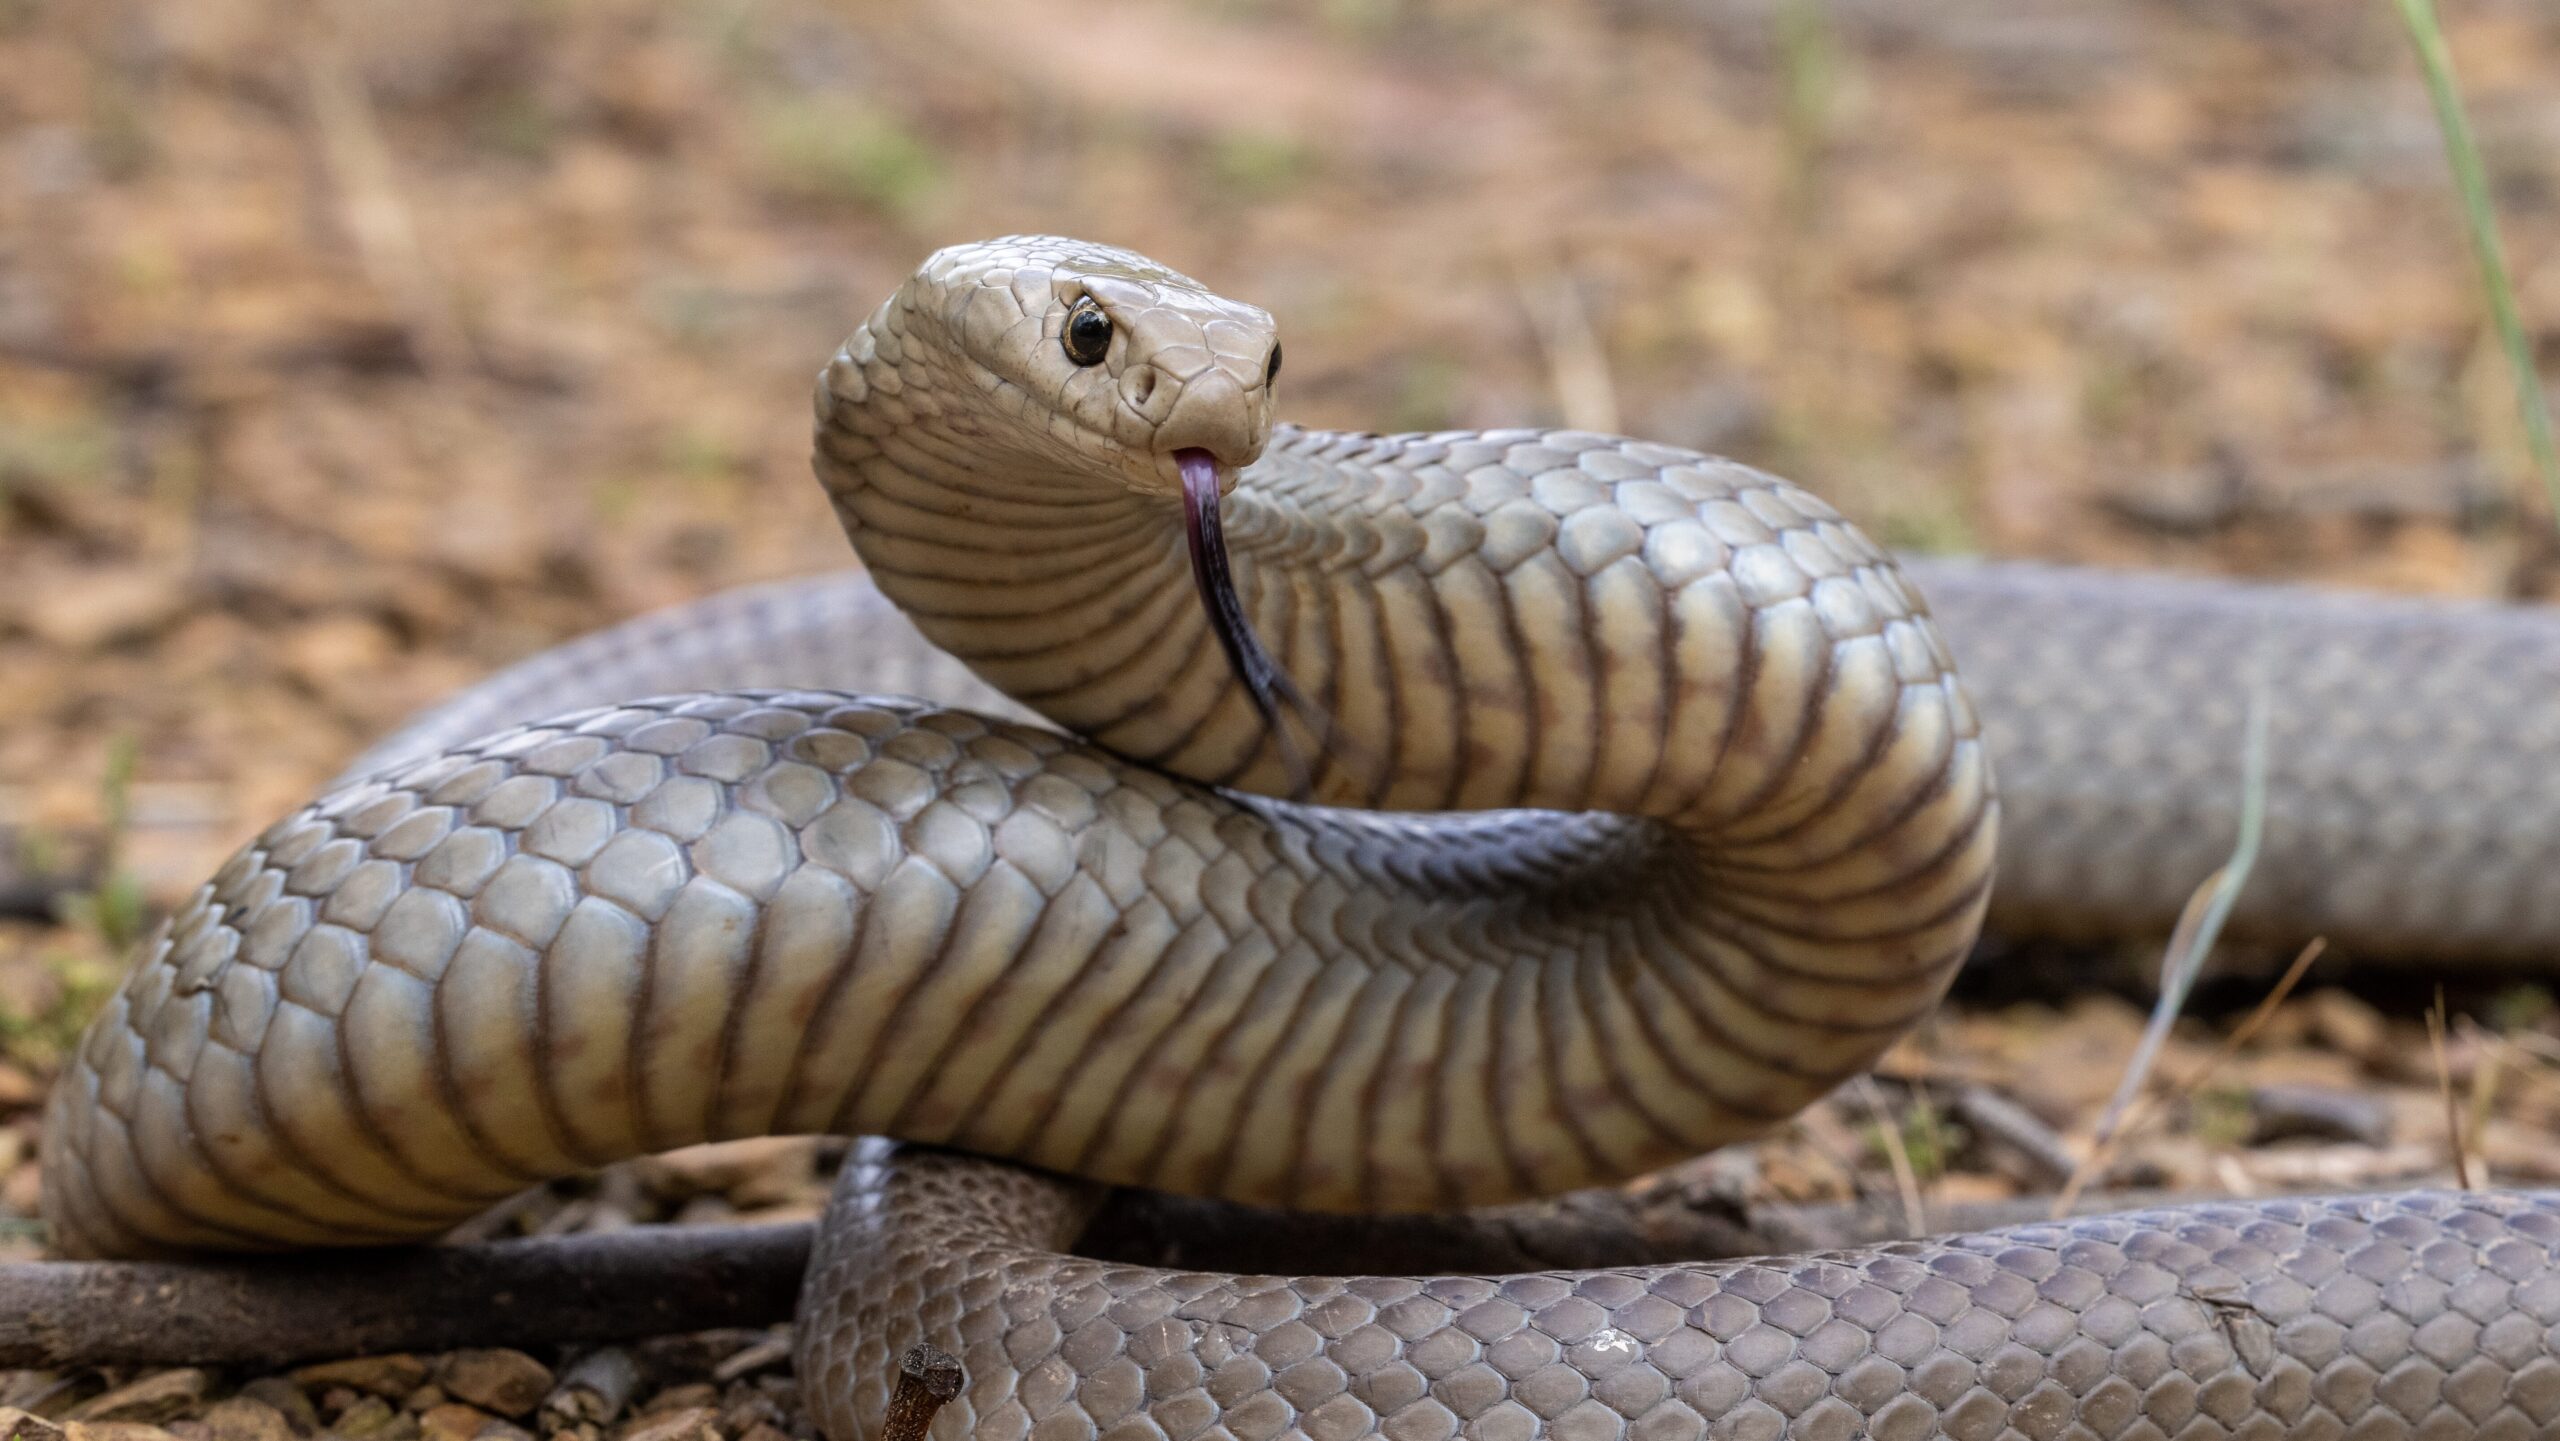 Top 10 Most Poisonous Snakes In The World - The Eastern Brown Snake